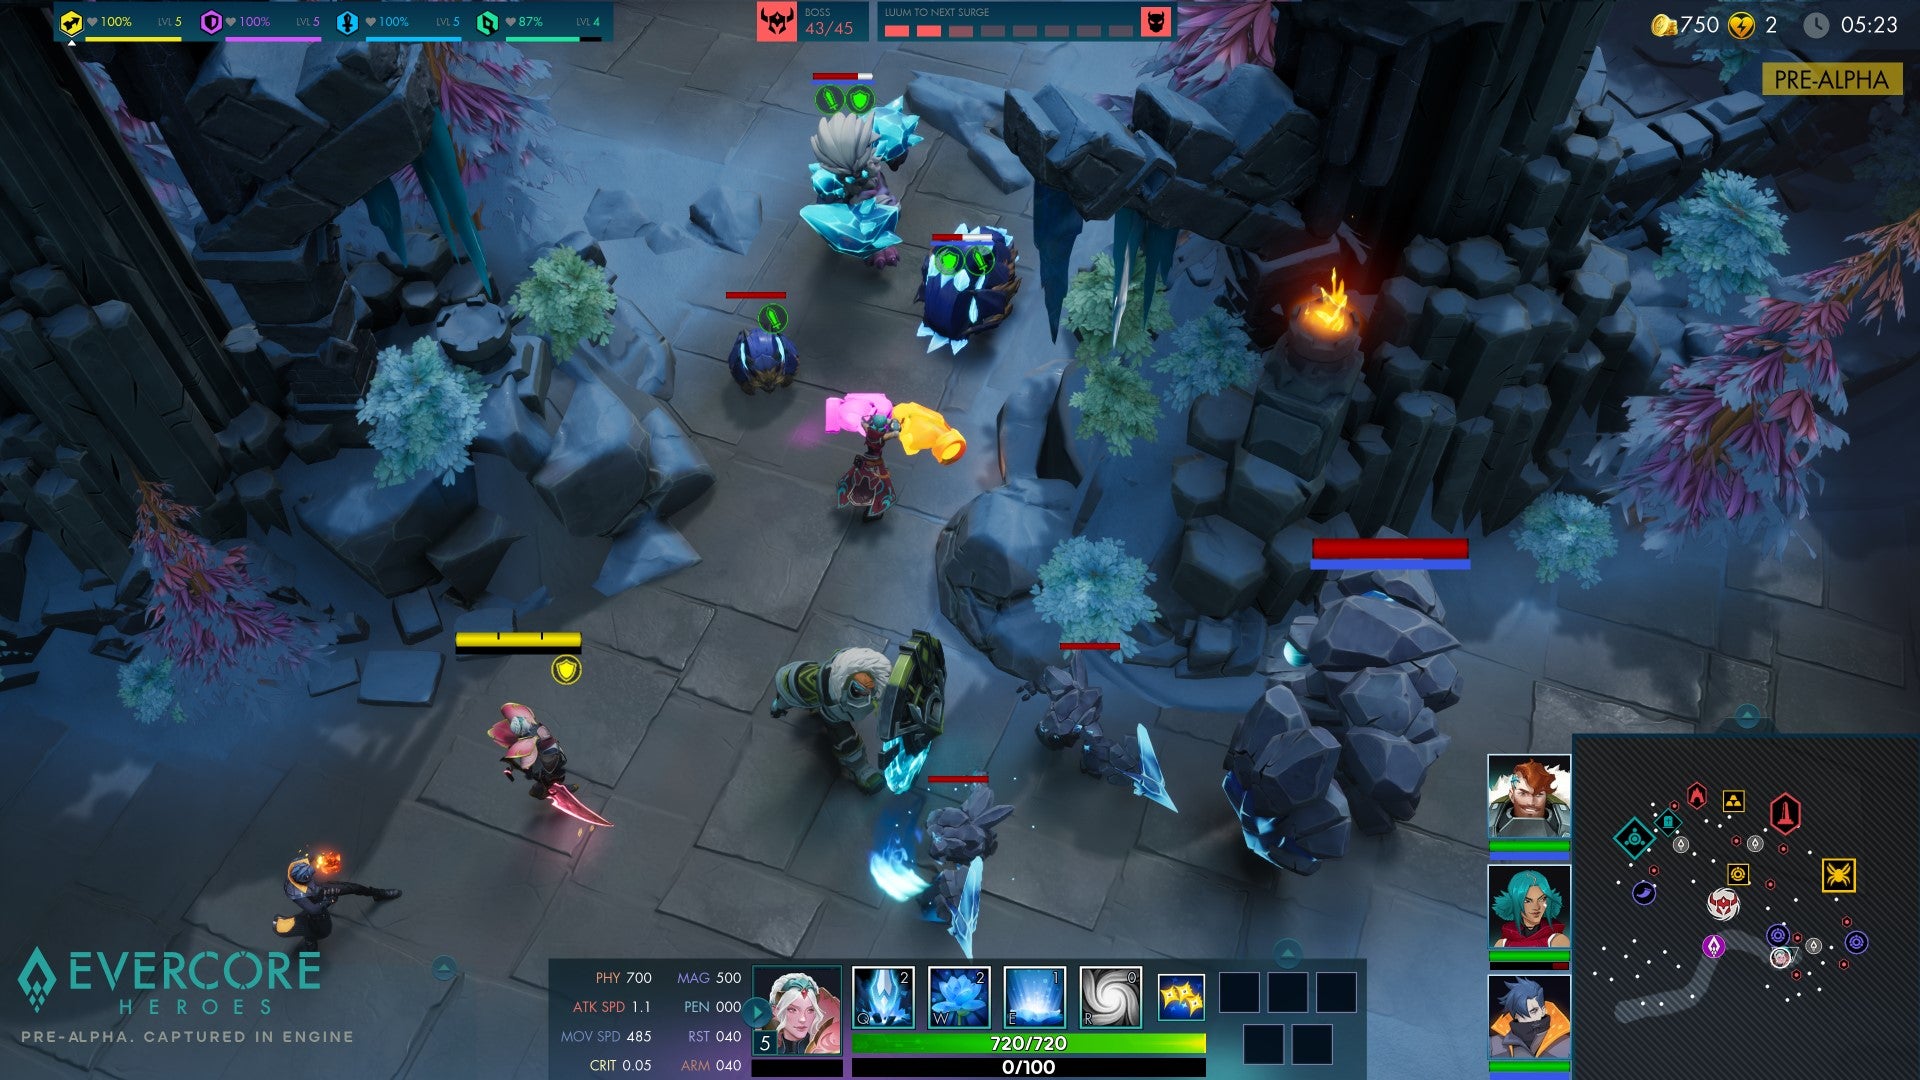 Heroes face-off against some rock monsters in an icey arena in Evercore Heroes.